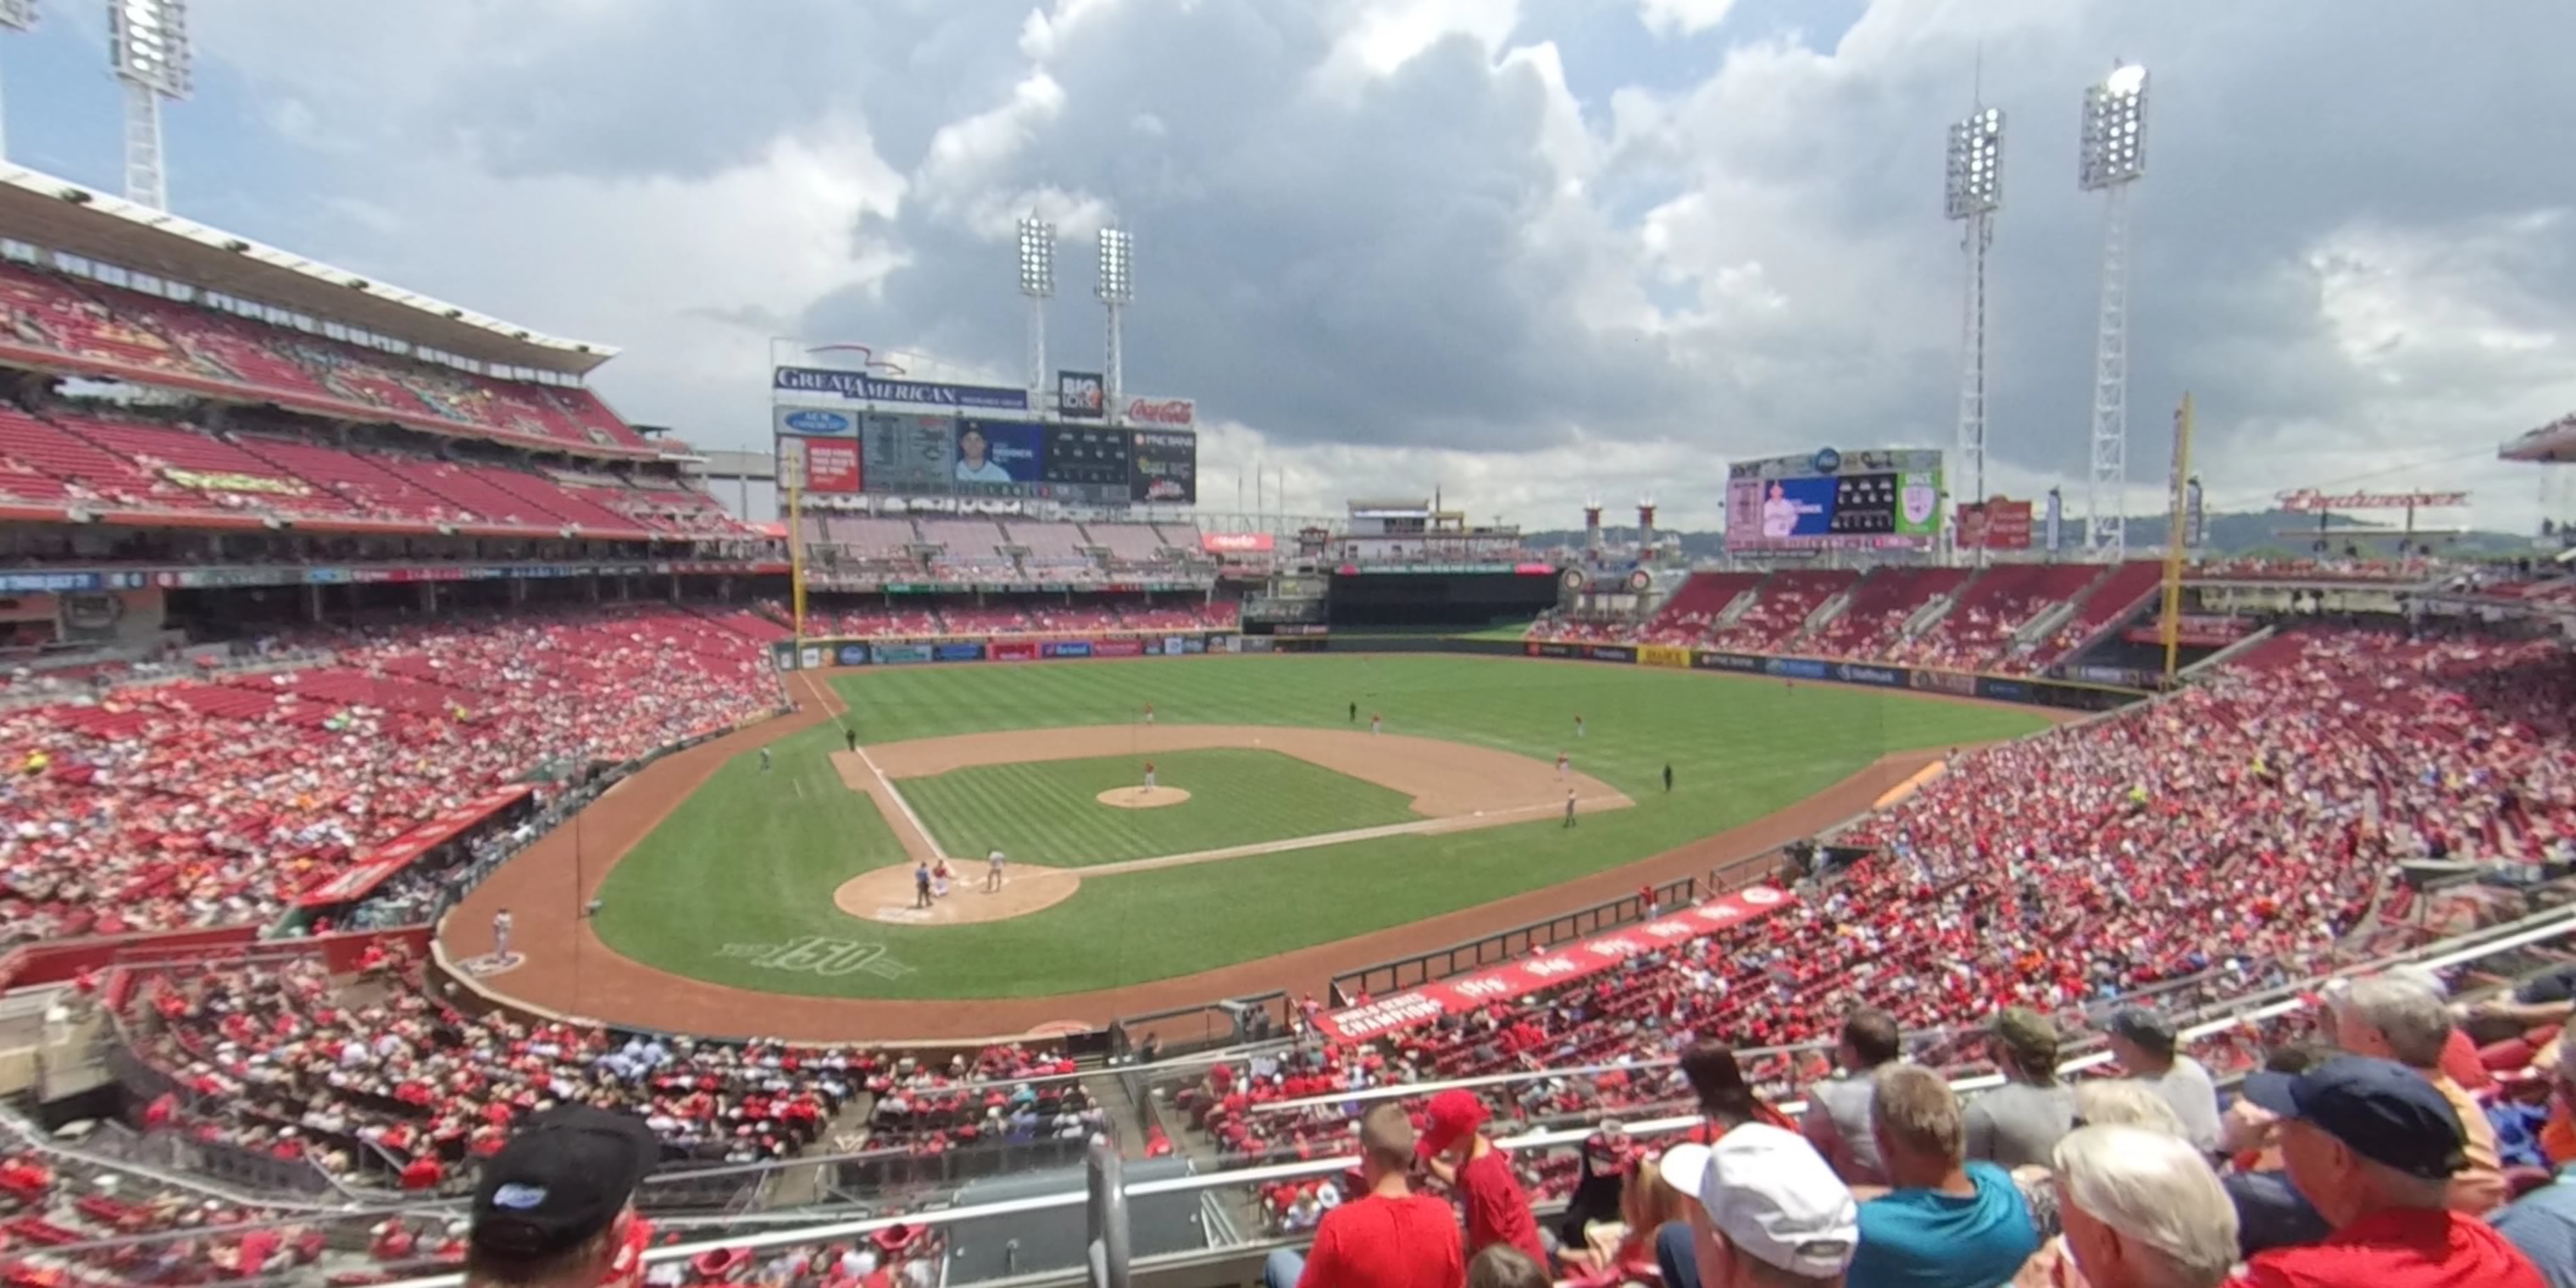 Section 227 at Great American Ball Park 